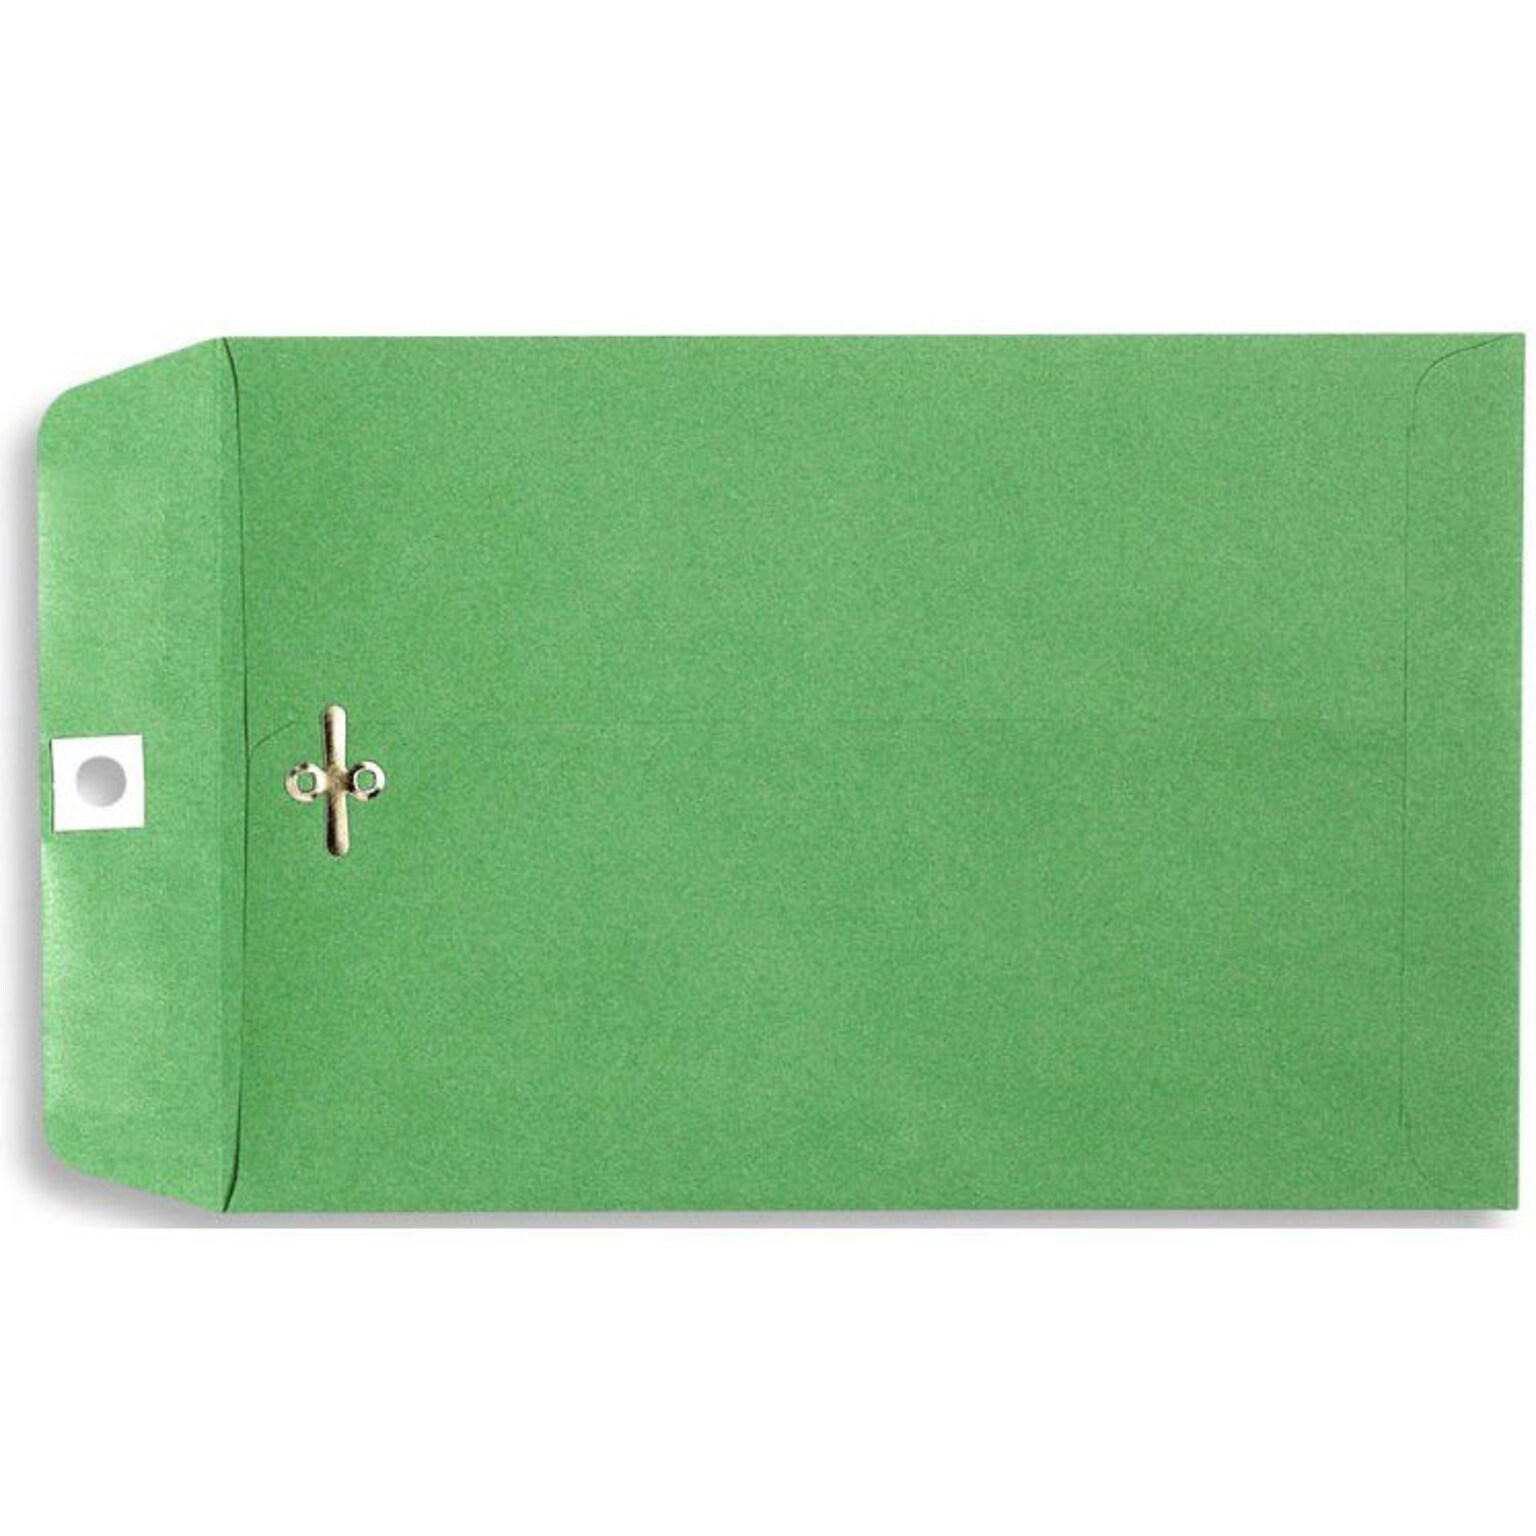 LUX® 70lbs. 10 x 13 Clasp Envelopes, Bright Green, 500/BX